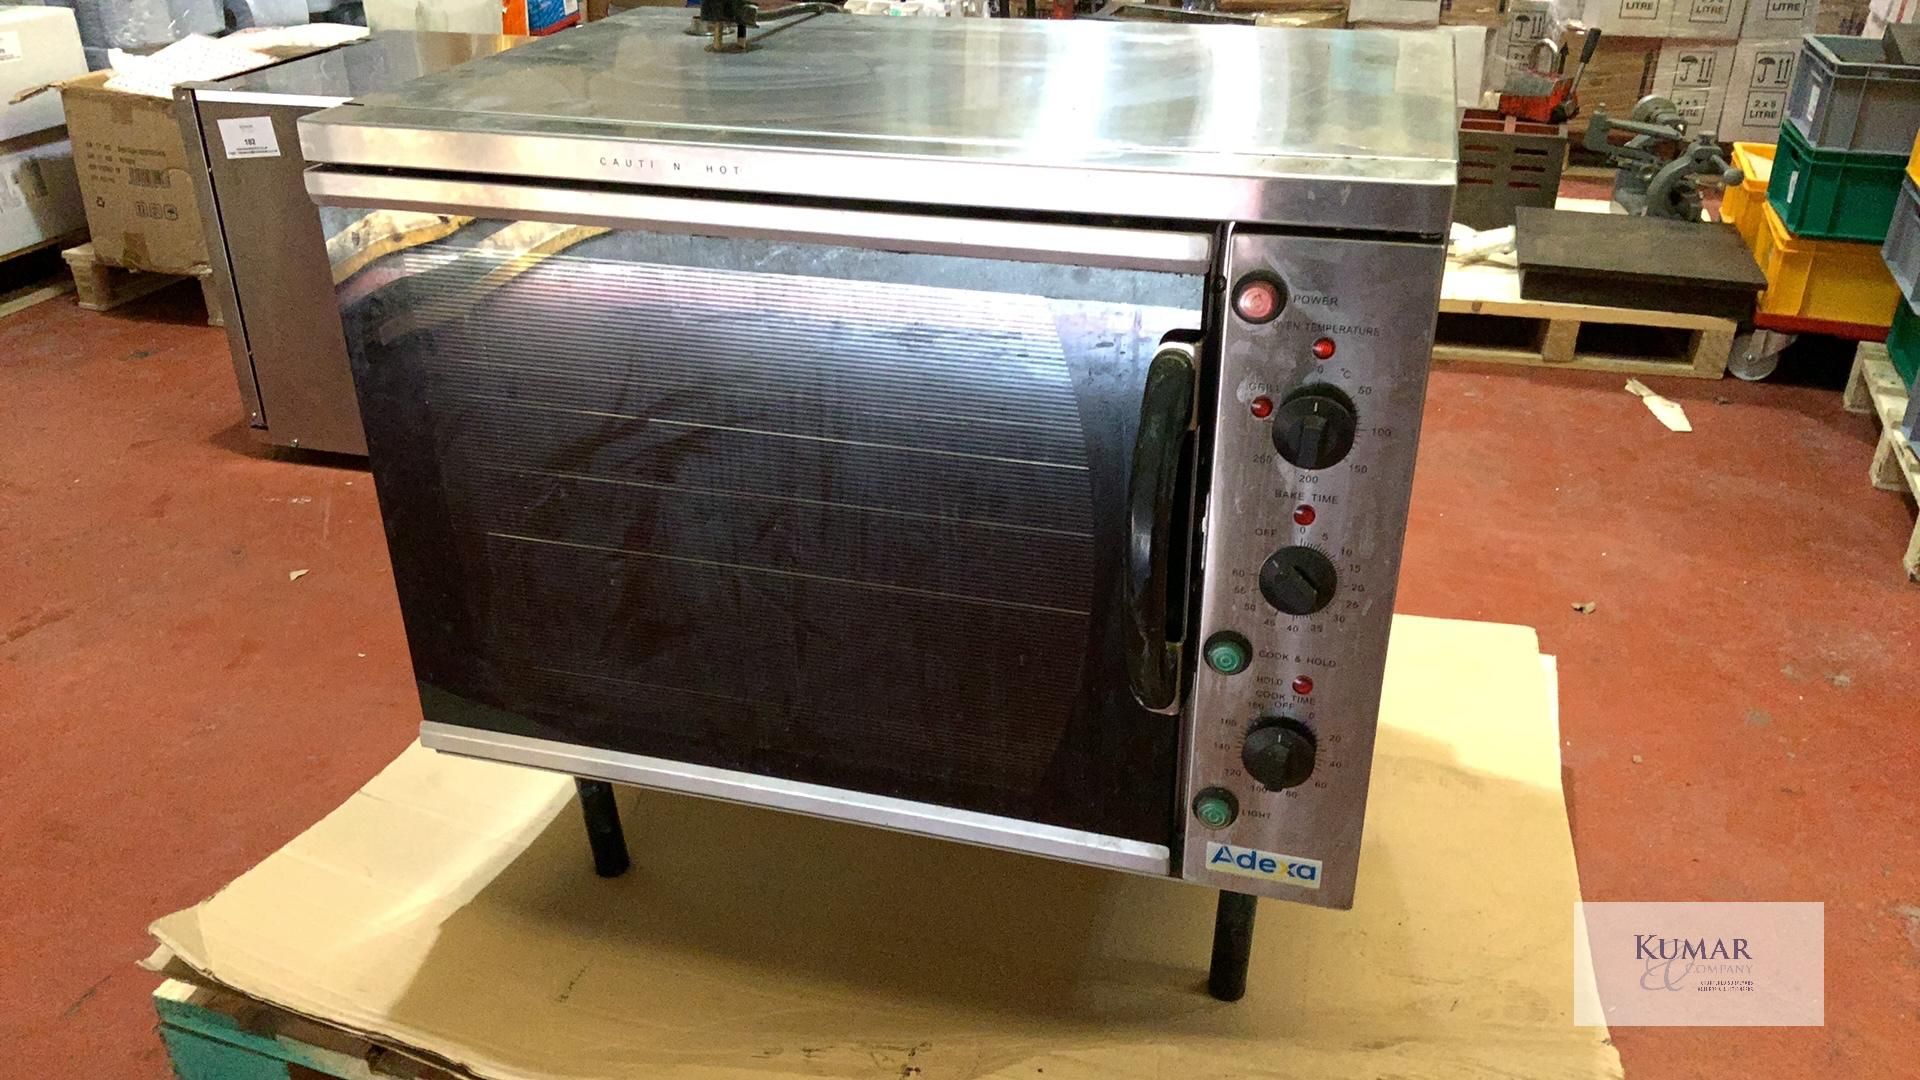 Adexa Convection Oven - Image 3 of 16